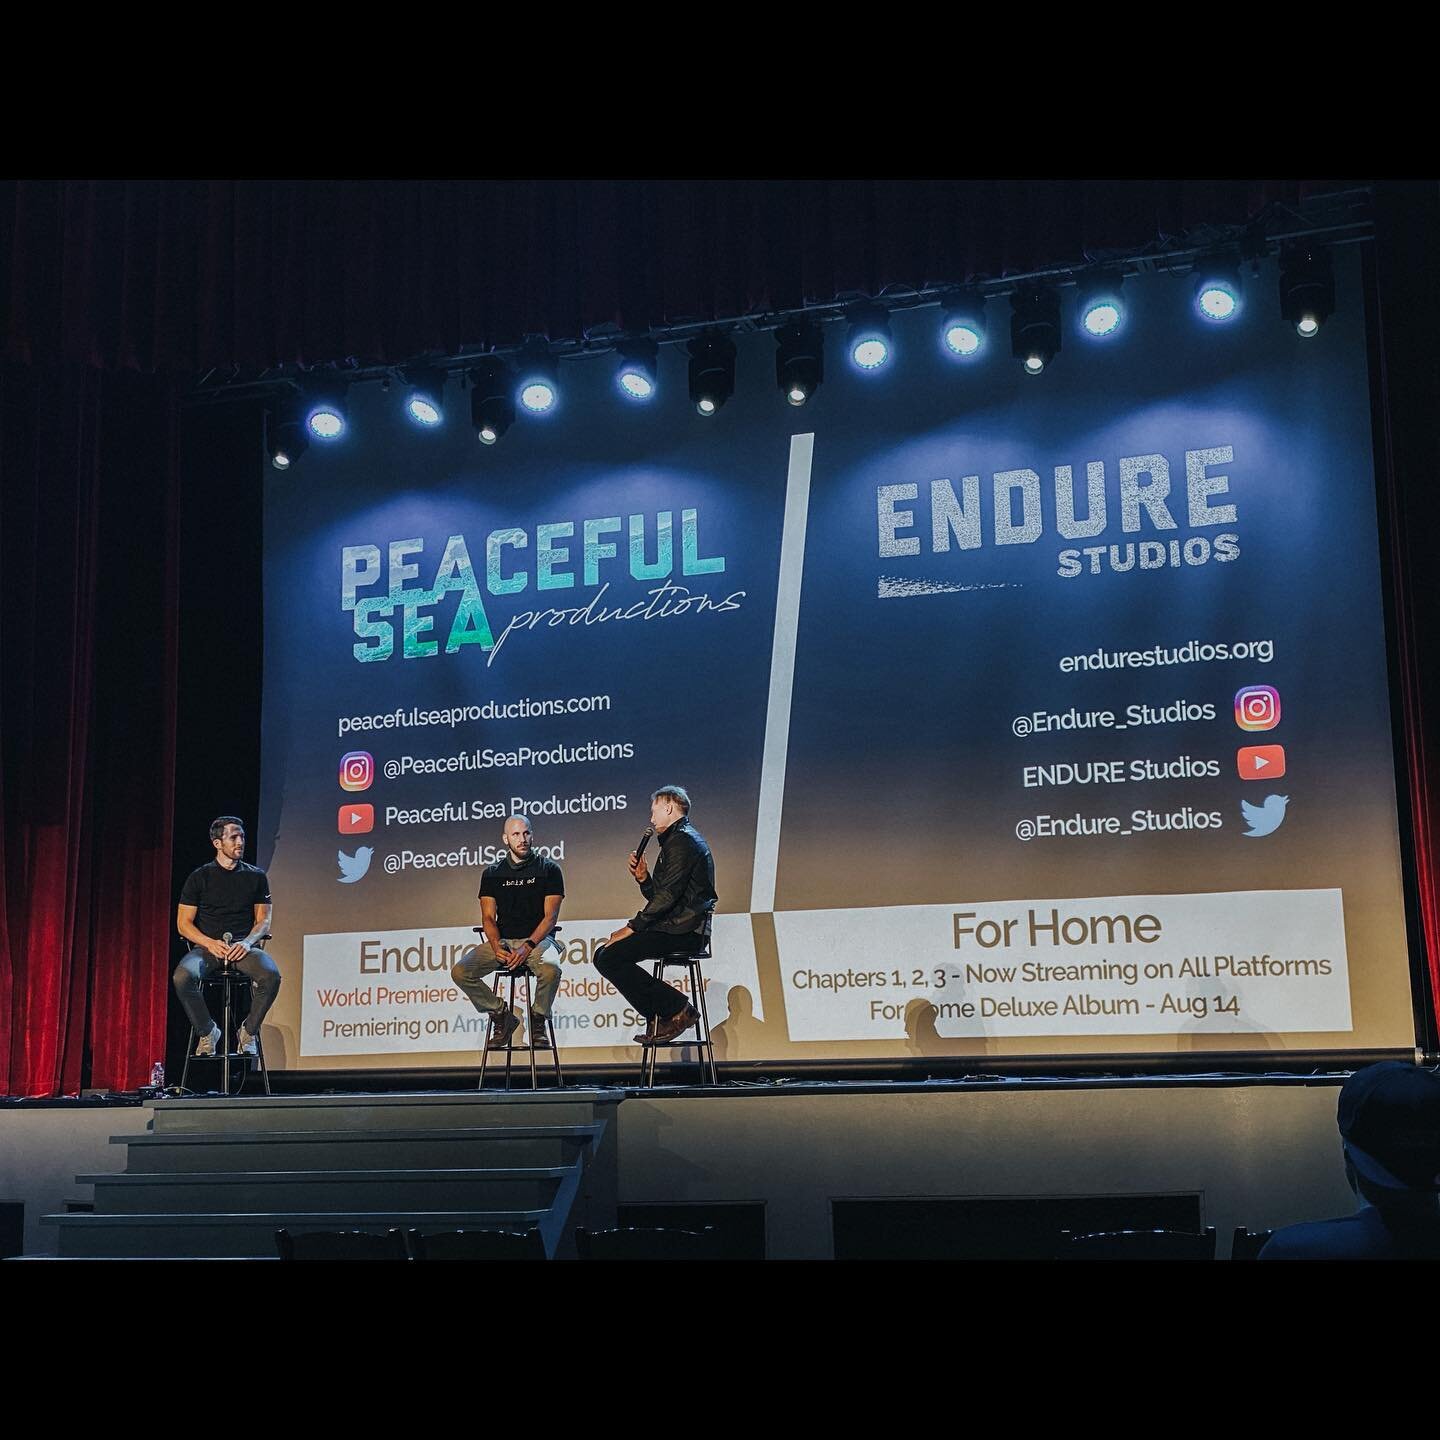 We had an amazing time at the documentary premier of &ldquo;Endure: Lebanon&rdquo; at the Ridglea Theater in Texas! 
_
Thanks so much to everyone for coming out, having great questions for us, and for supporting what we&rsquo;re doing at @endure_stud